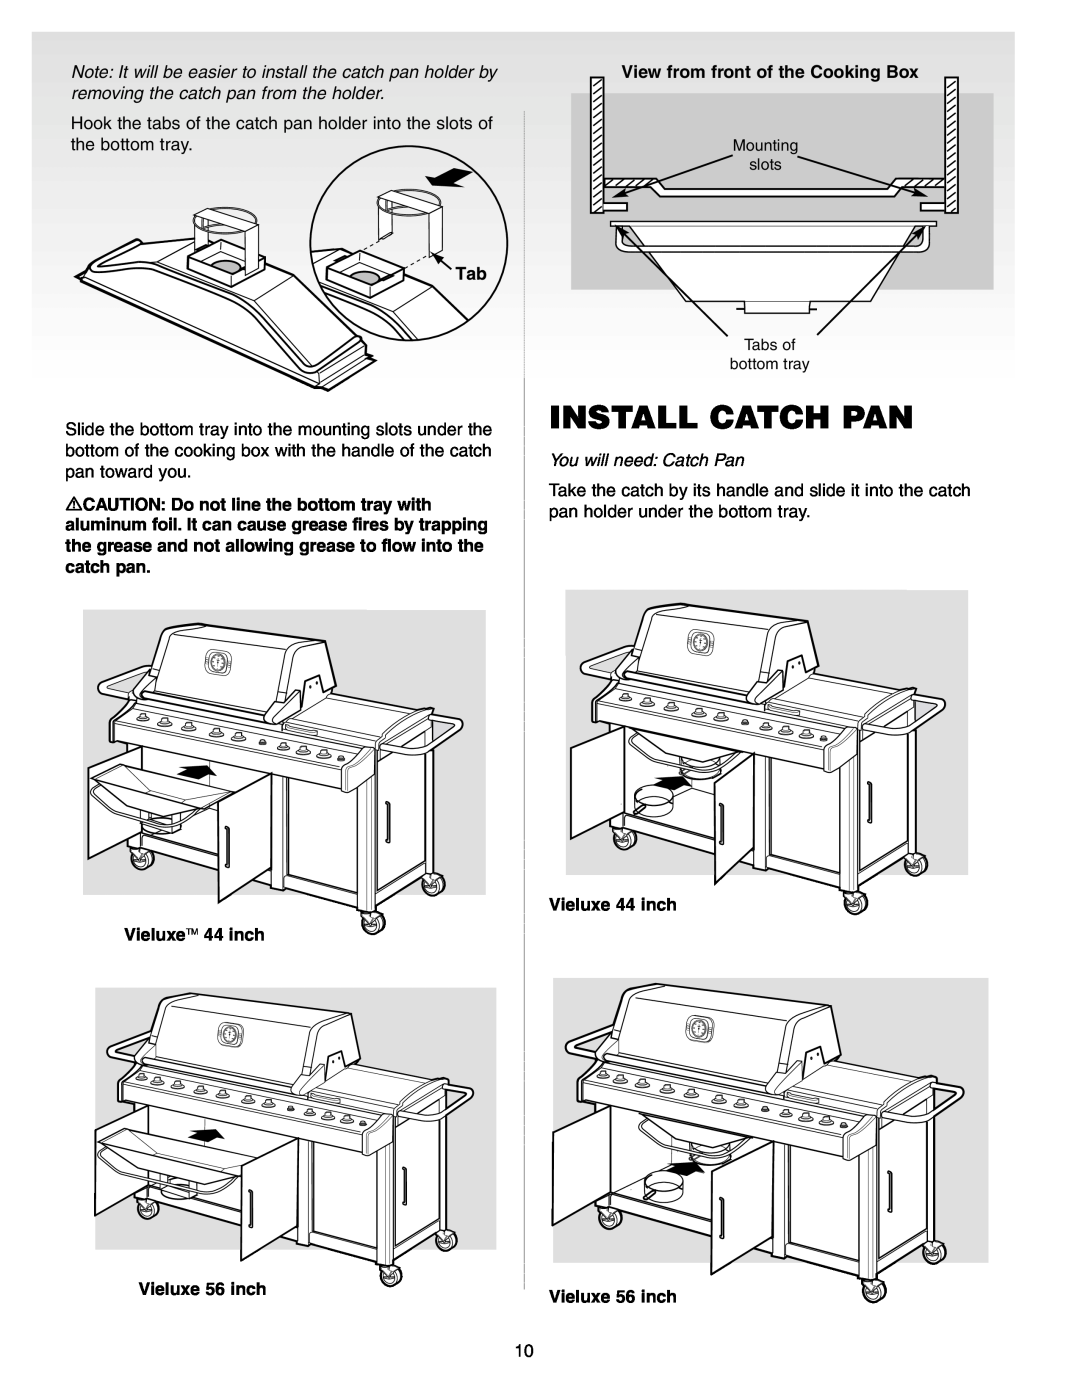 Weber Gas Burner manual Install Catch Pan, You will need Catch Pan 